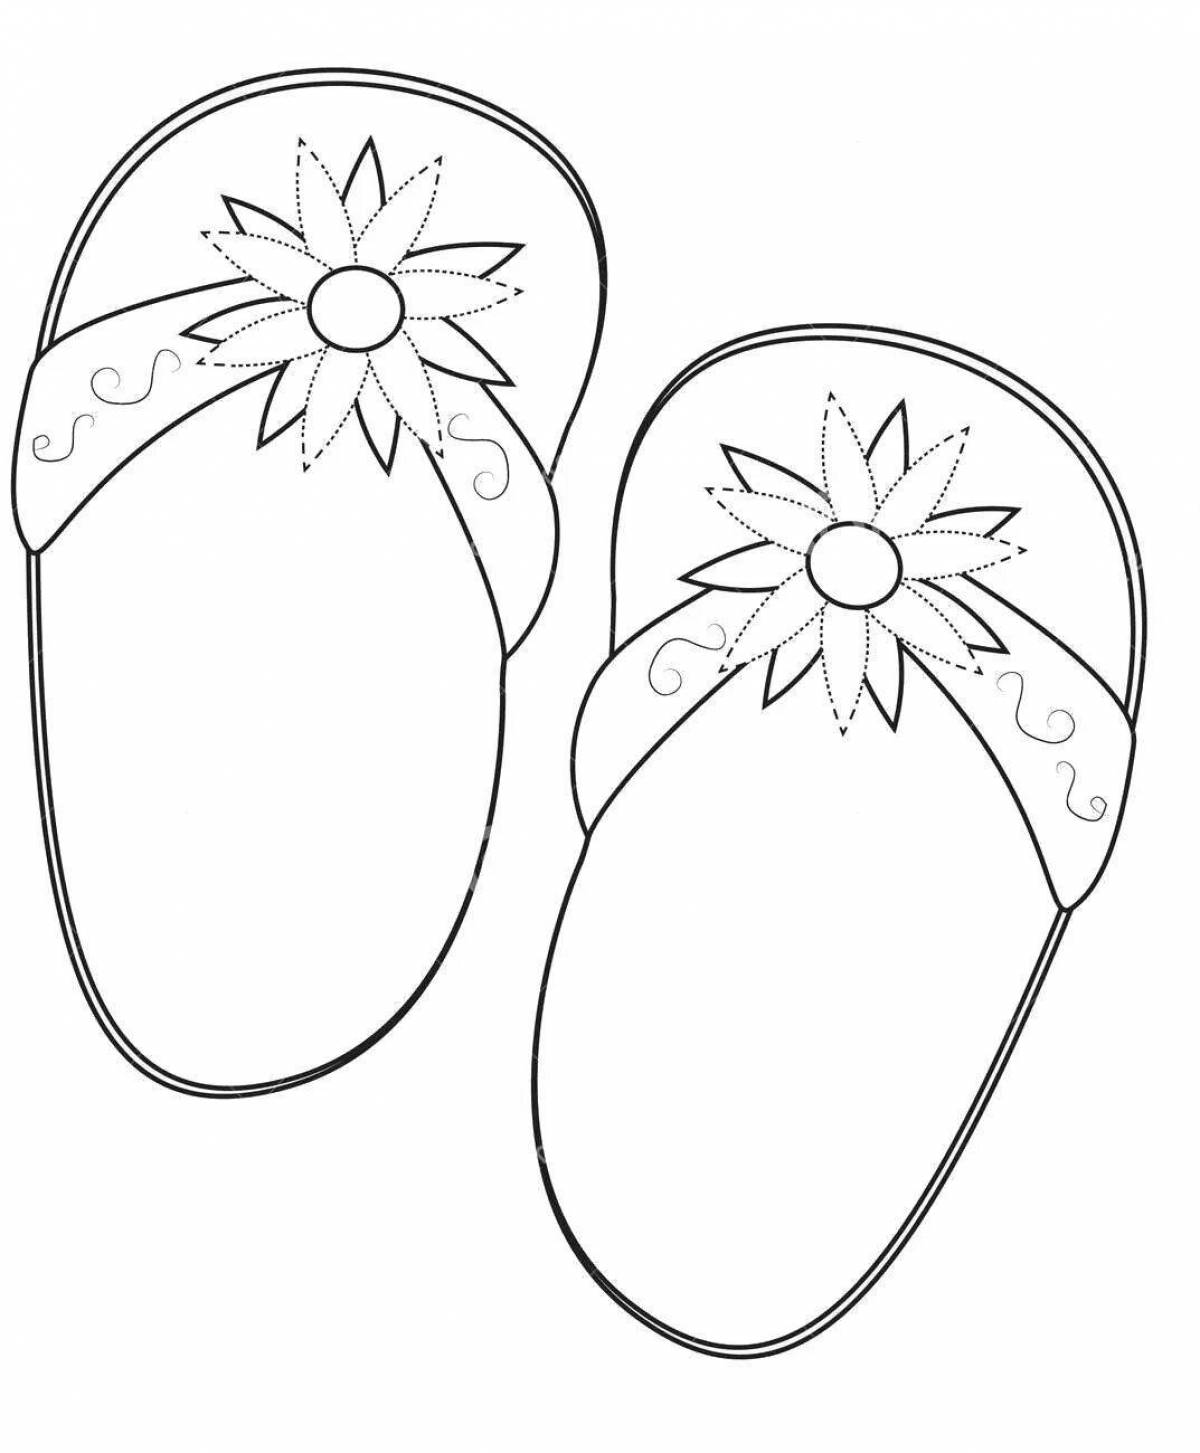 Coloring page happy slippers for kids